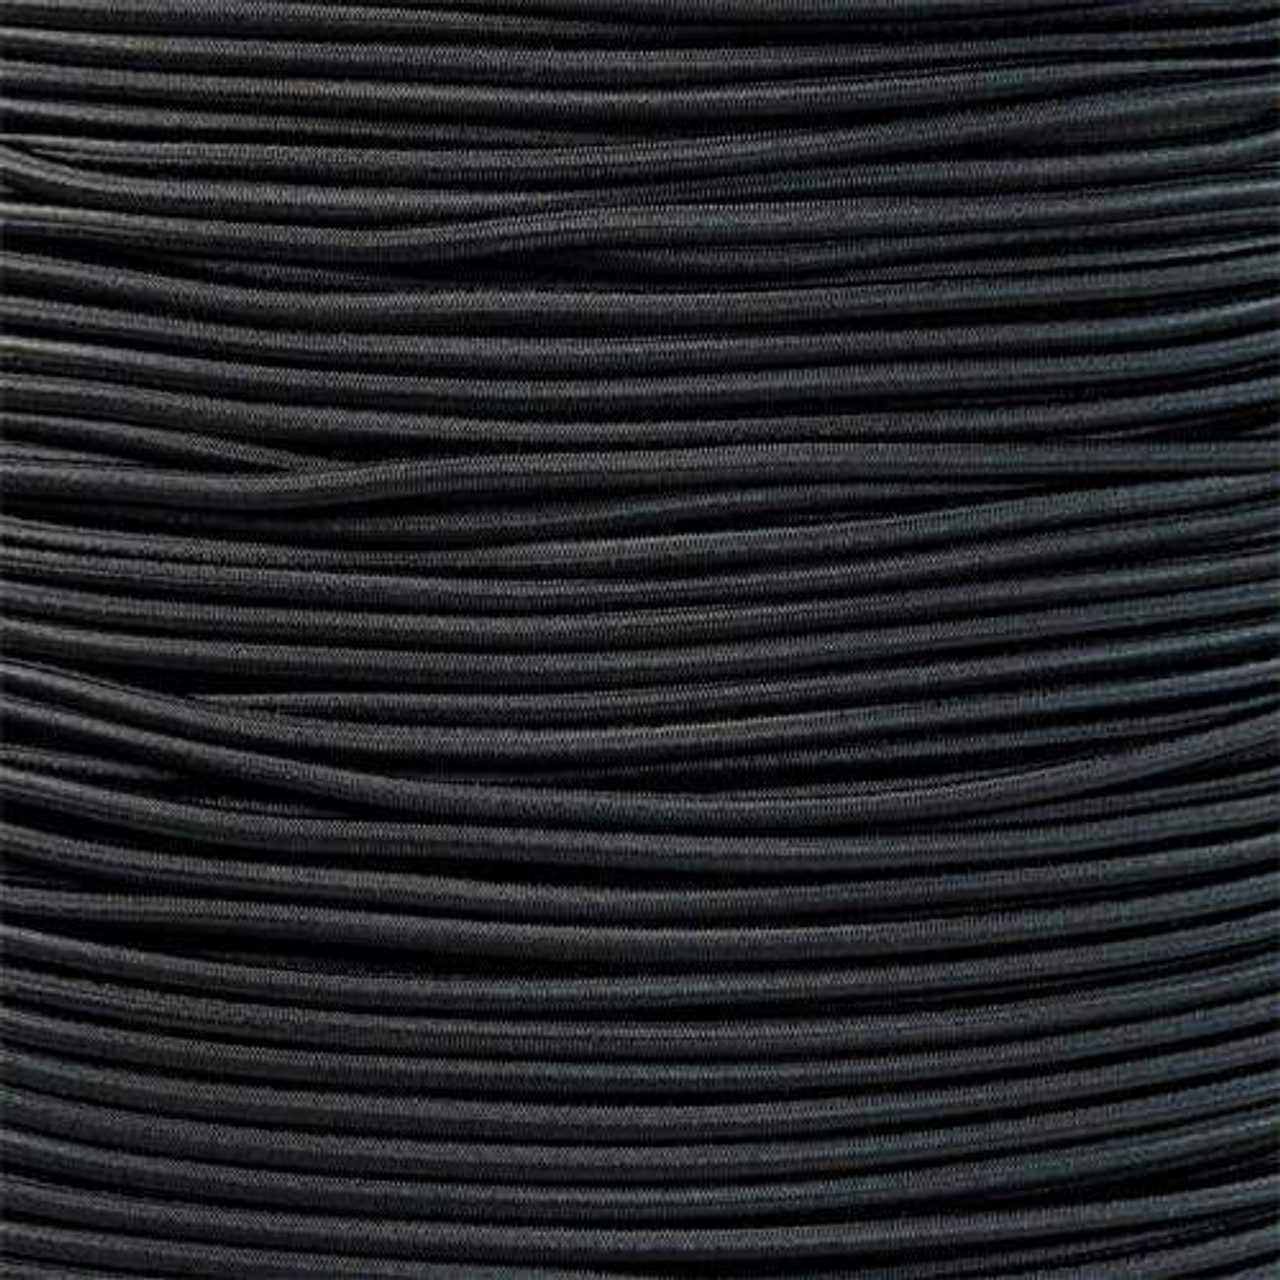 Lanlord Black Shock Cord 1/8 Inch,Bungie Cord,Elastic Cord, Bungee Cords,72  Feet (22m),Black1/8In72Ft.